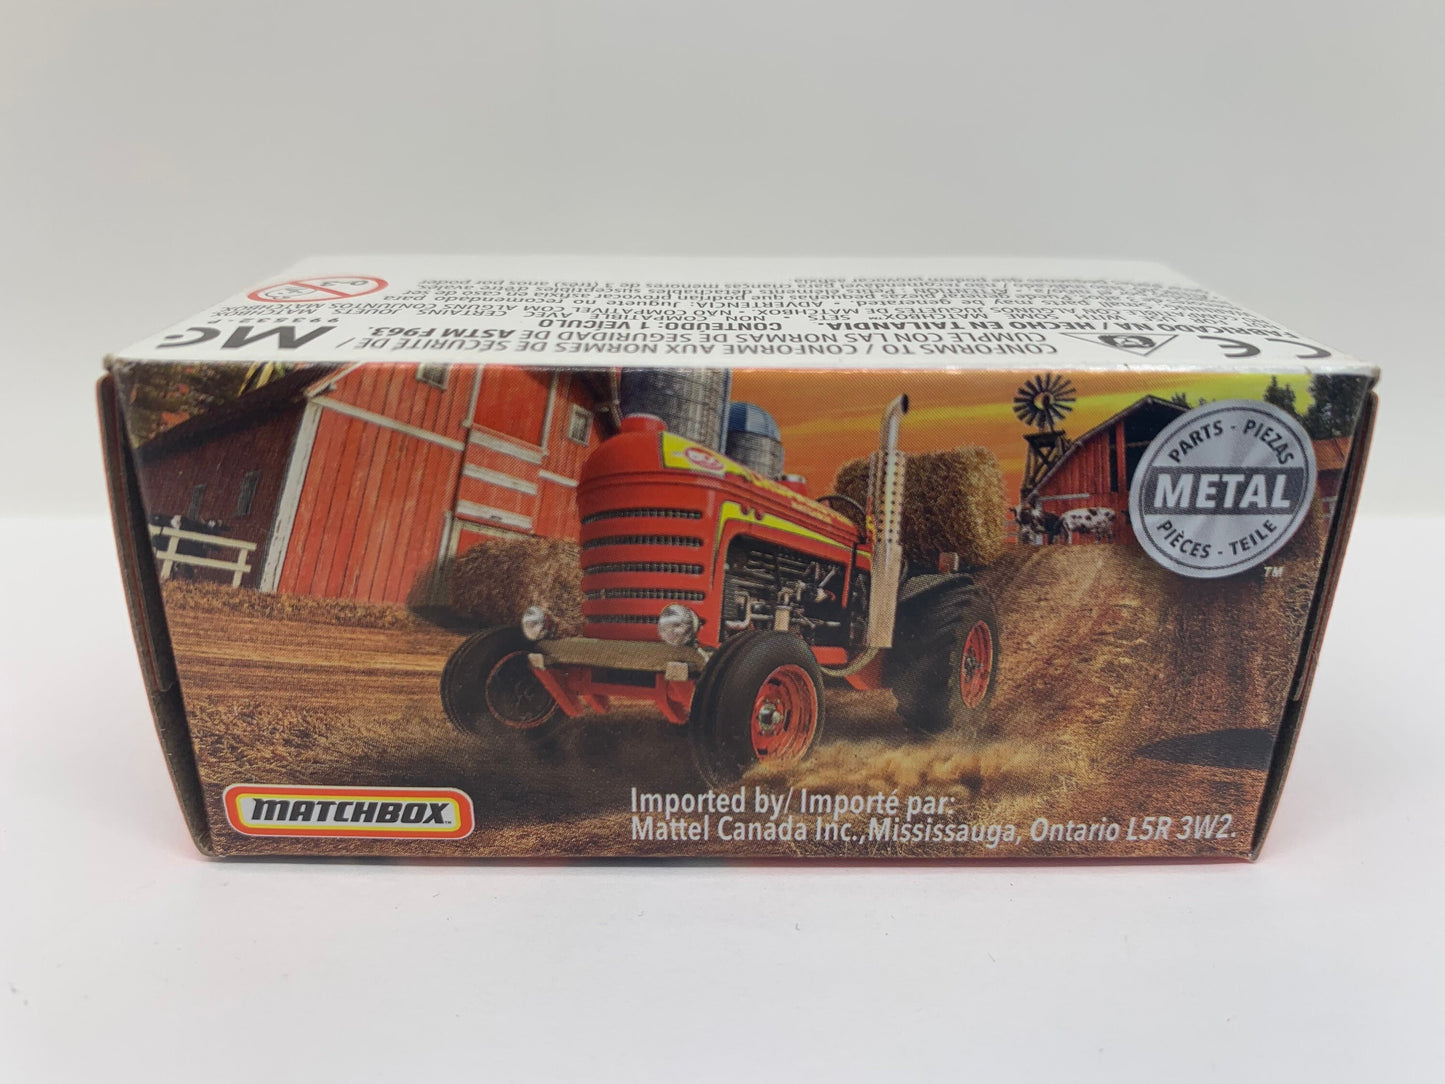 Matchbox Crop Master Red MBX Countryside Perfect Birthday Gift Miniature Collectable Model Toy Car